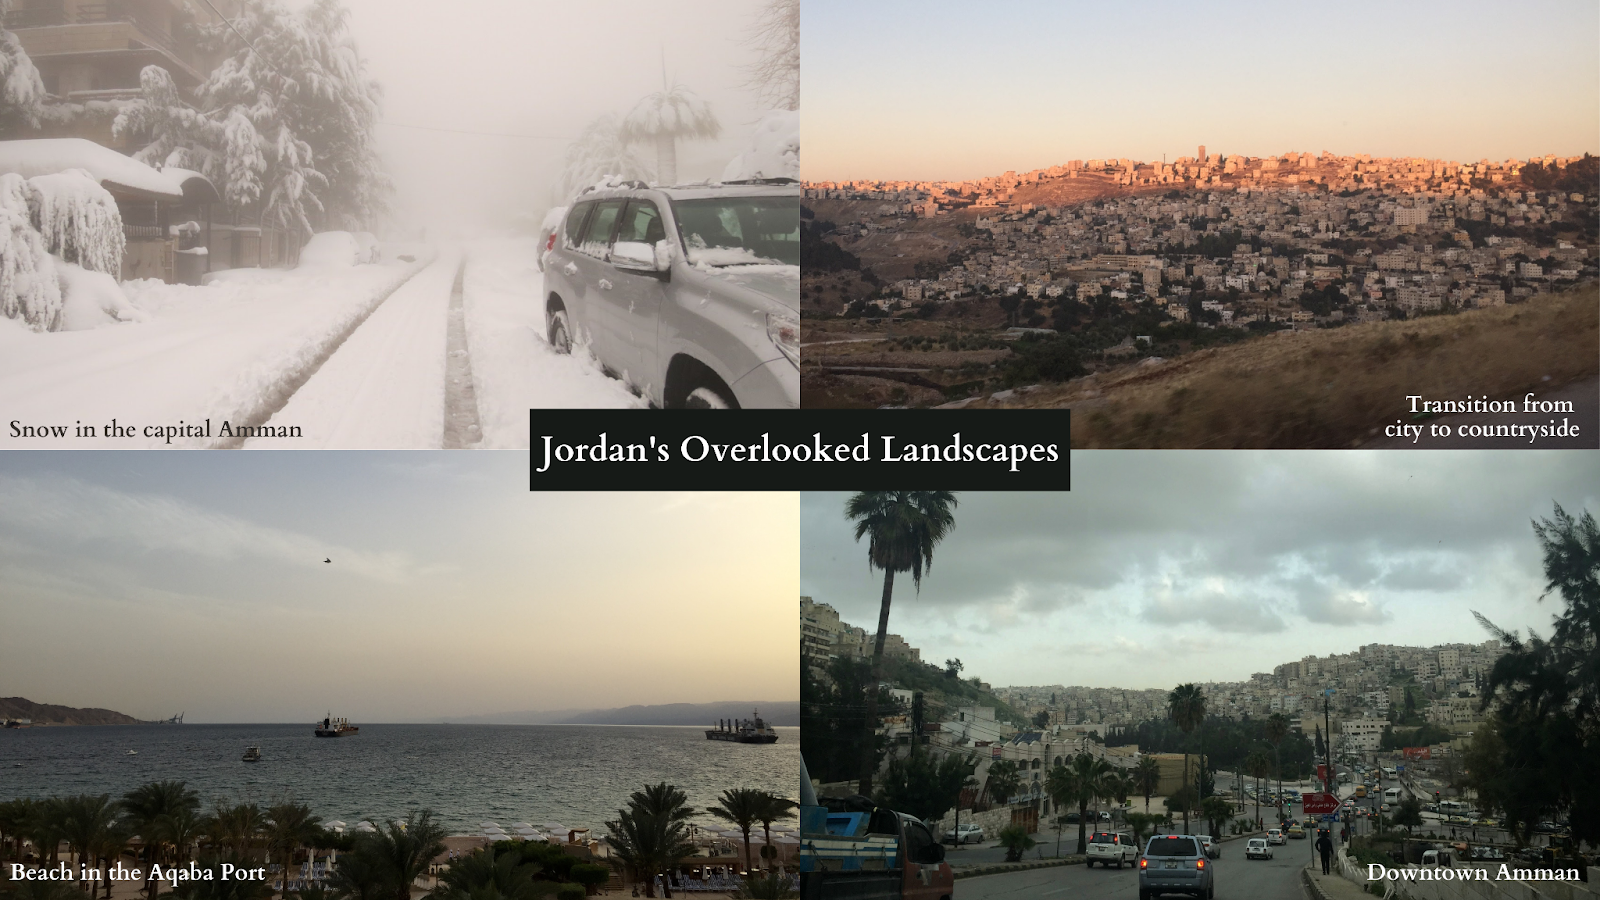 Four images: 1. snow covers a semi urban street in Amman 2. sun sets over the transition from city to countryside 3. Palm trees line a coast line upon a vast expanse of water 4. The streets of Amman, with shifting elevation and palm trees under a cloudy sky.